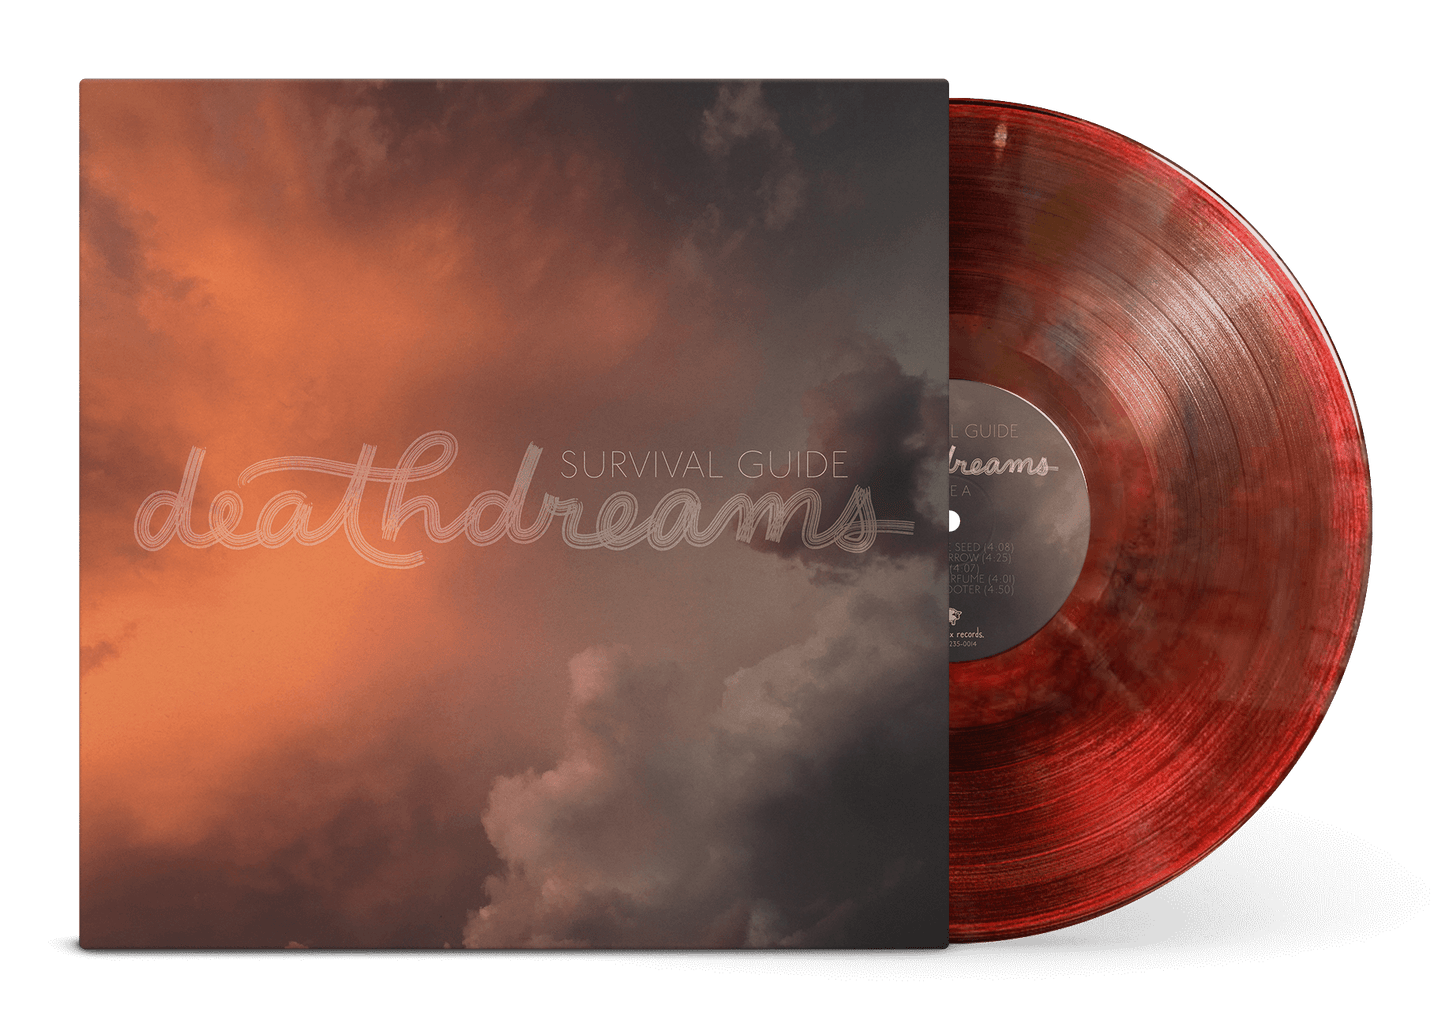 Survival Guide: deathdreams Blood Variant Vinyl (Limited to 100)